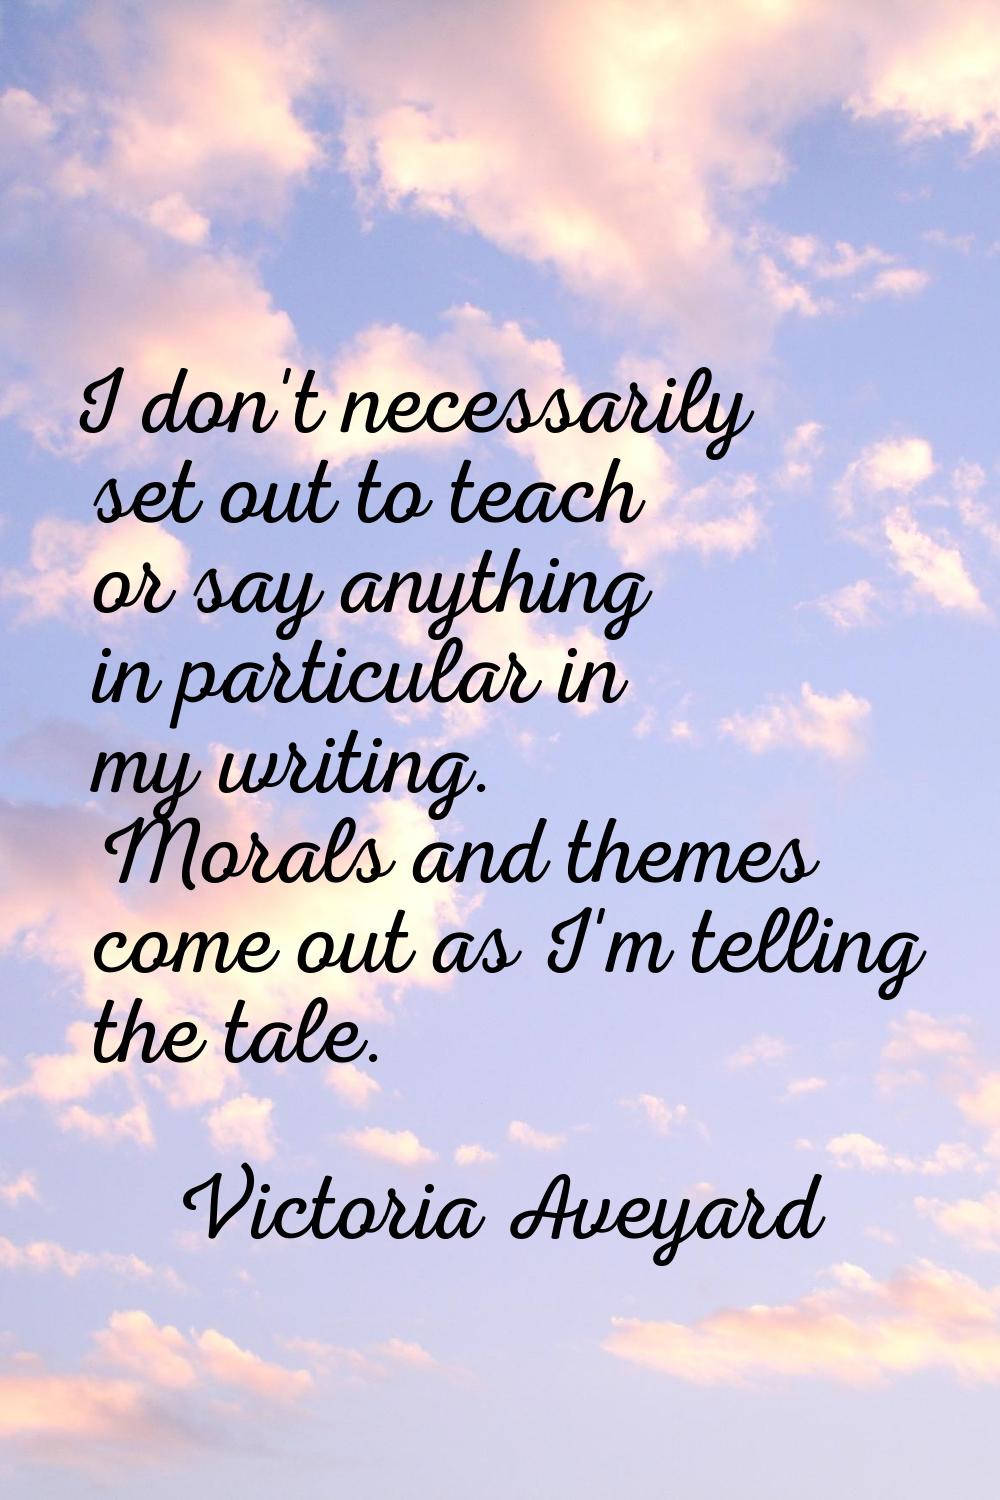 I don't necessarily set out to teach or say anything in particular in my writing. Morals and themes